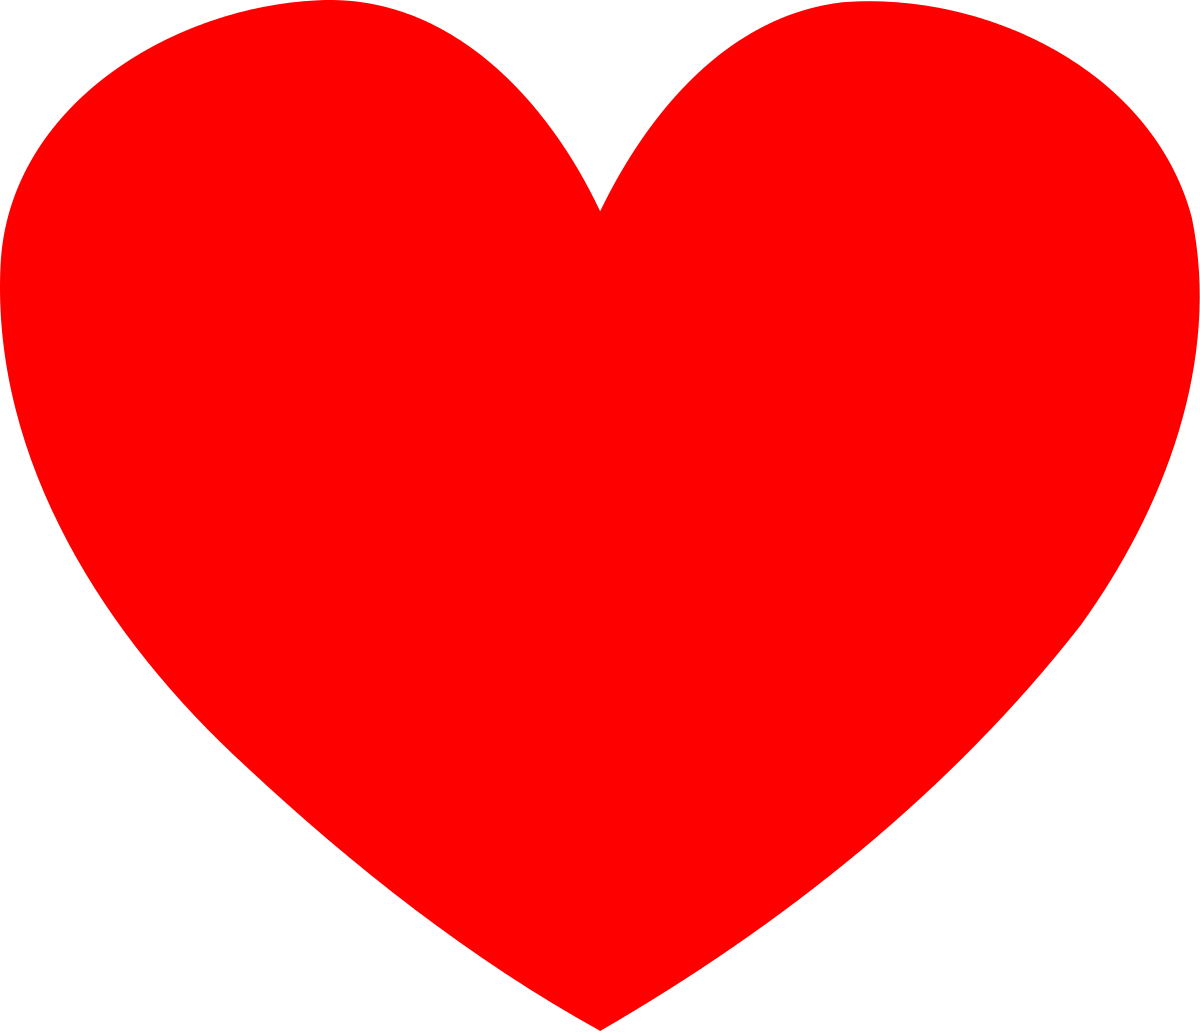 1200px-Hearth-shape-drawing-1_nevit_090.svg.png